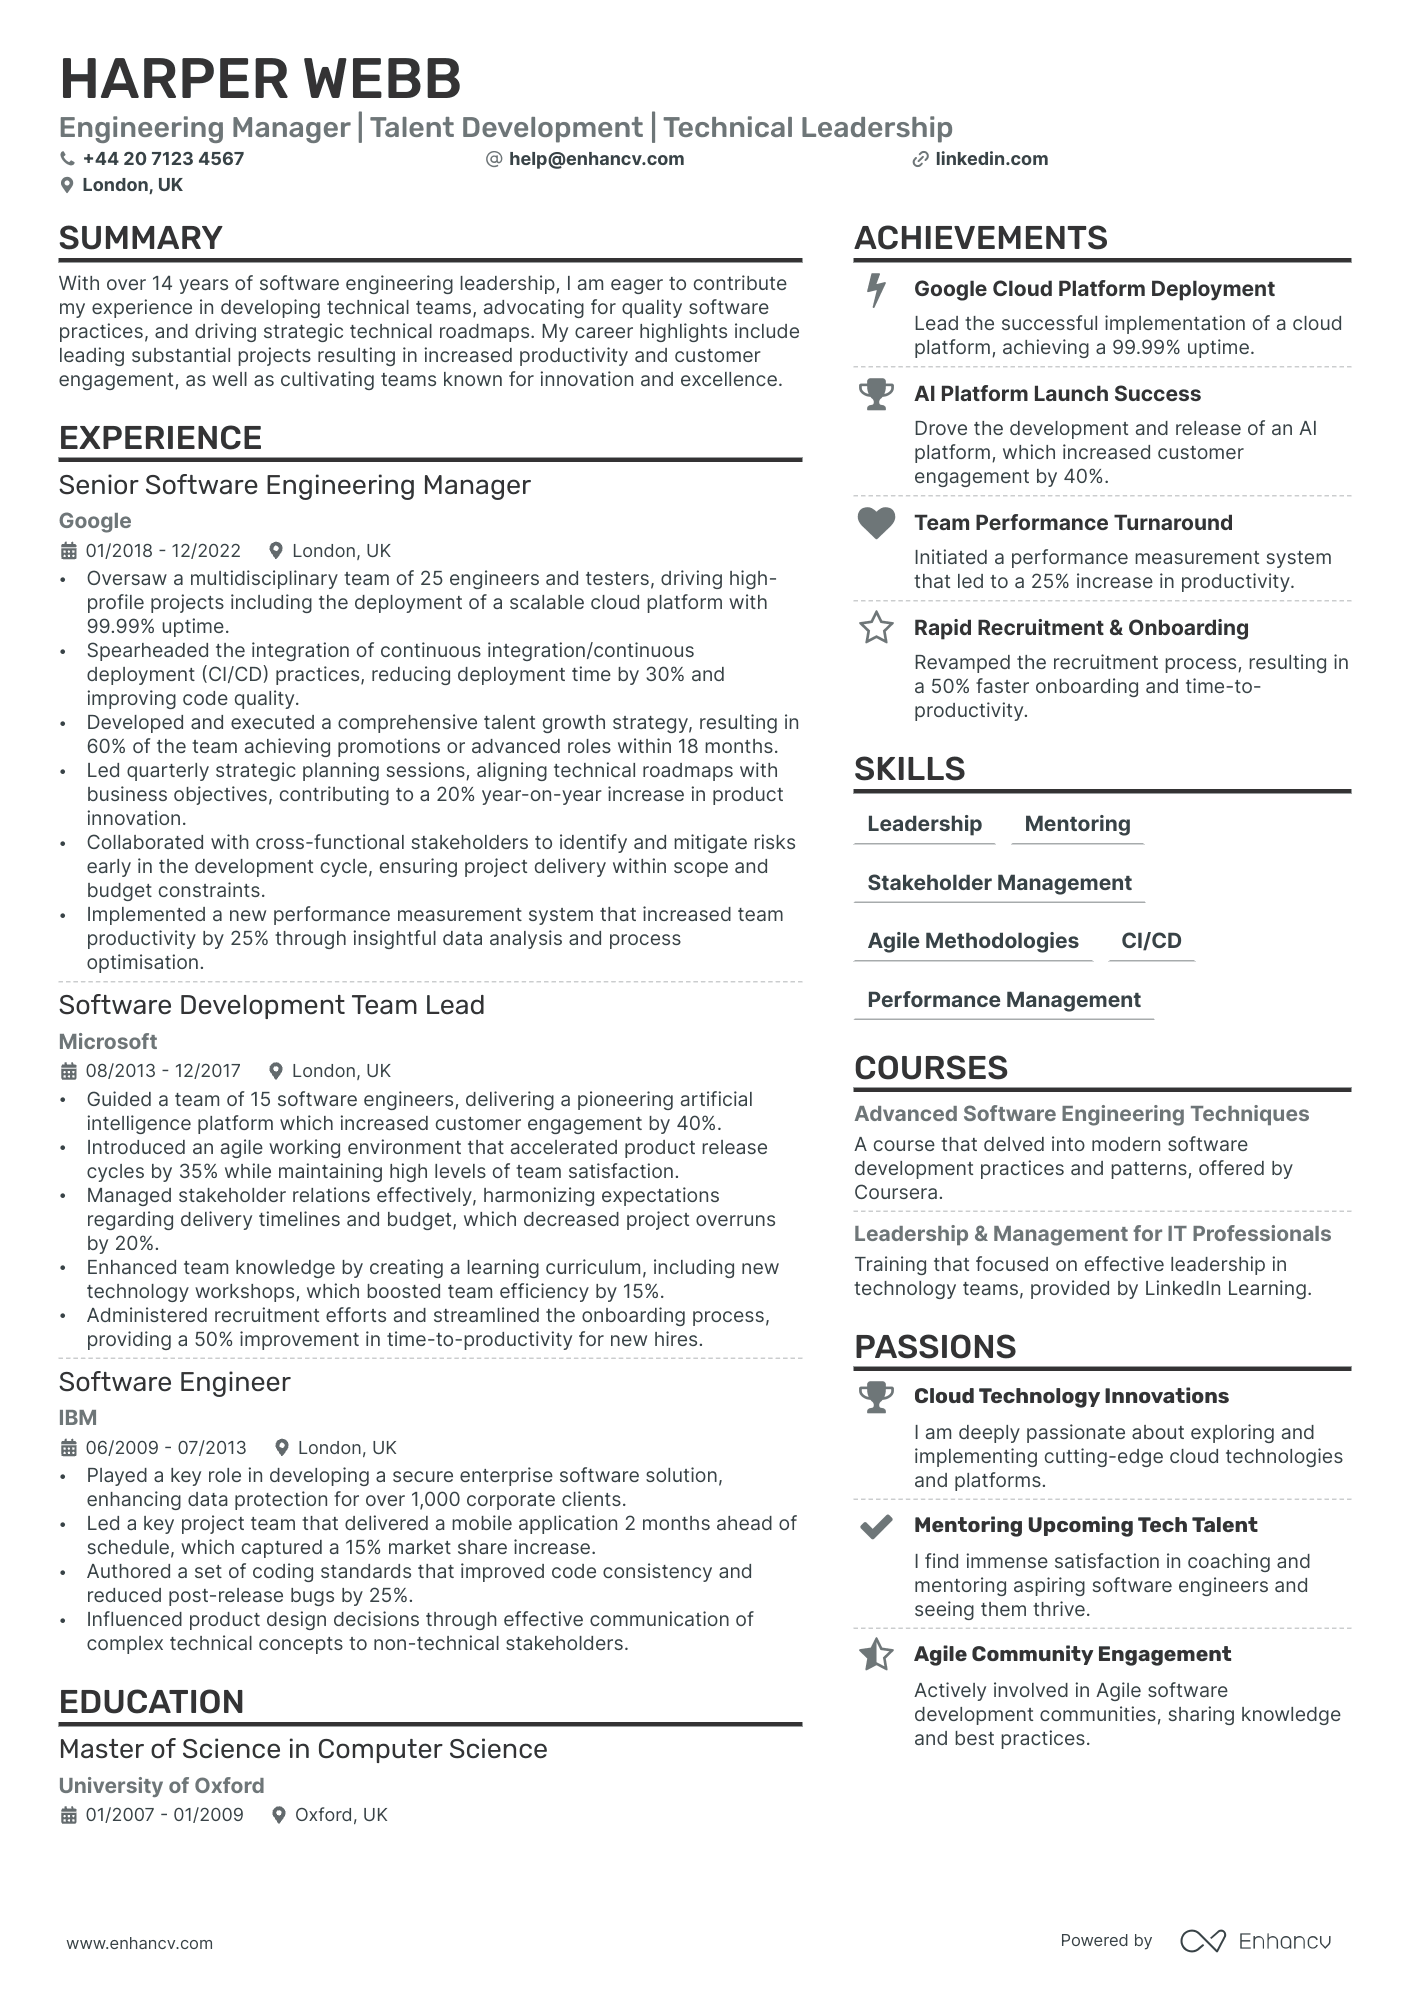 Engineering Manager cv example